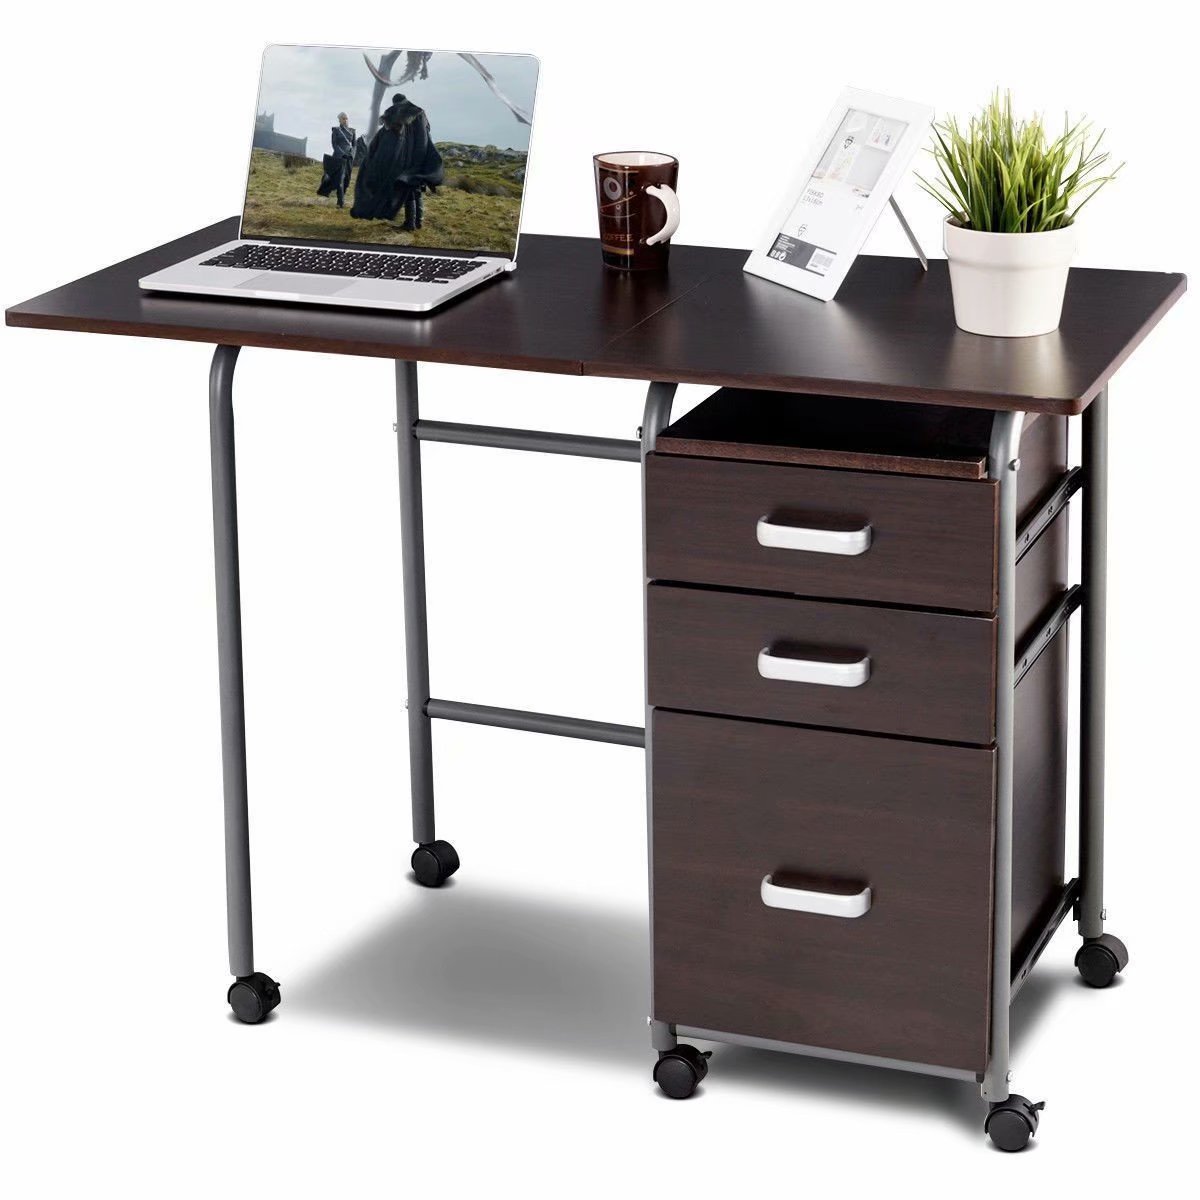 SKONYON Adult Contemporary Rectangle Portable Computer Desks with 2 Box Drawer/1 File Drawer Removable Adjustable Height, Brown